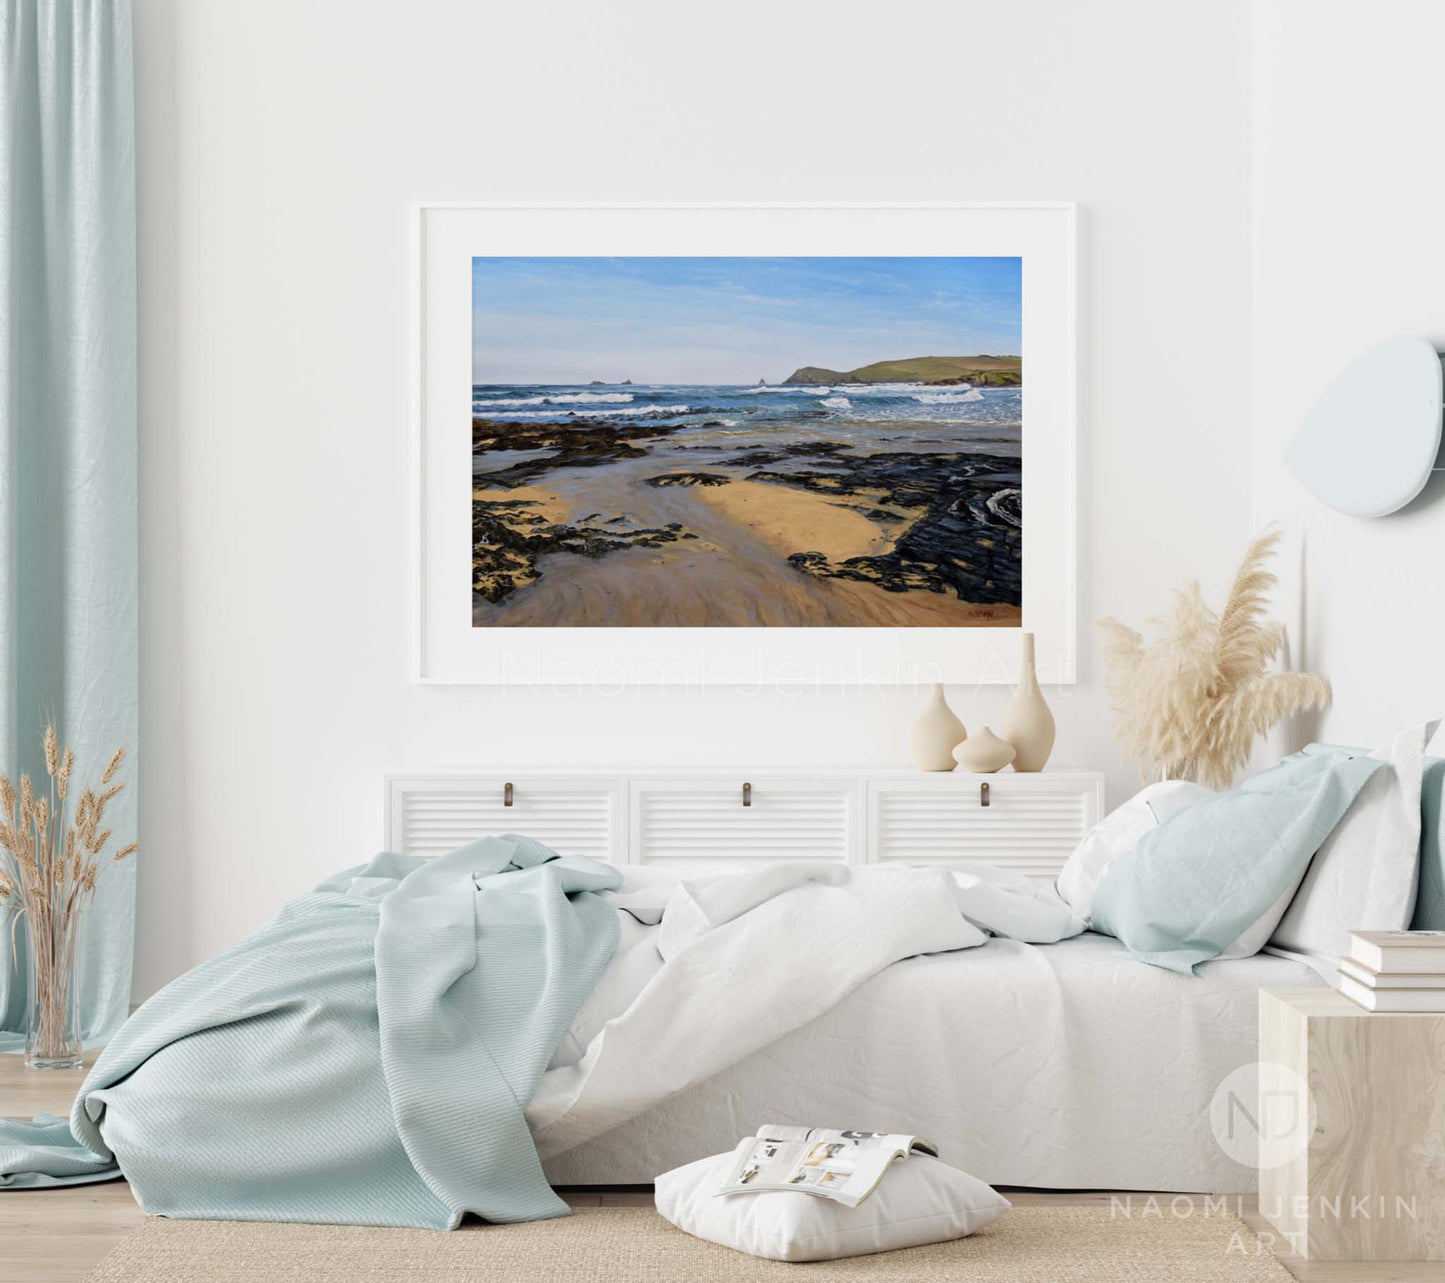 Beach print of Constantine Bay by Naomi Jenkin in a white frame and bedroom setting.